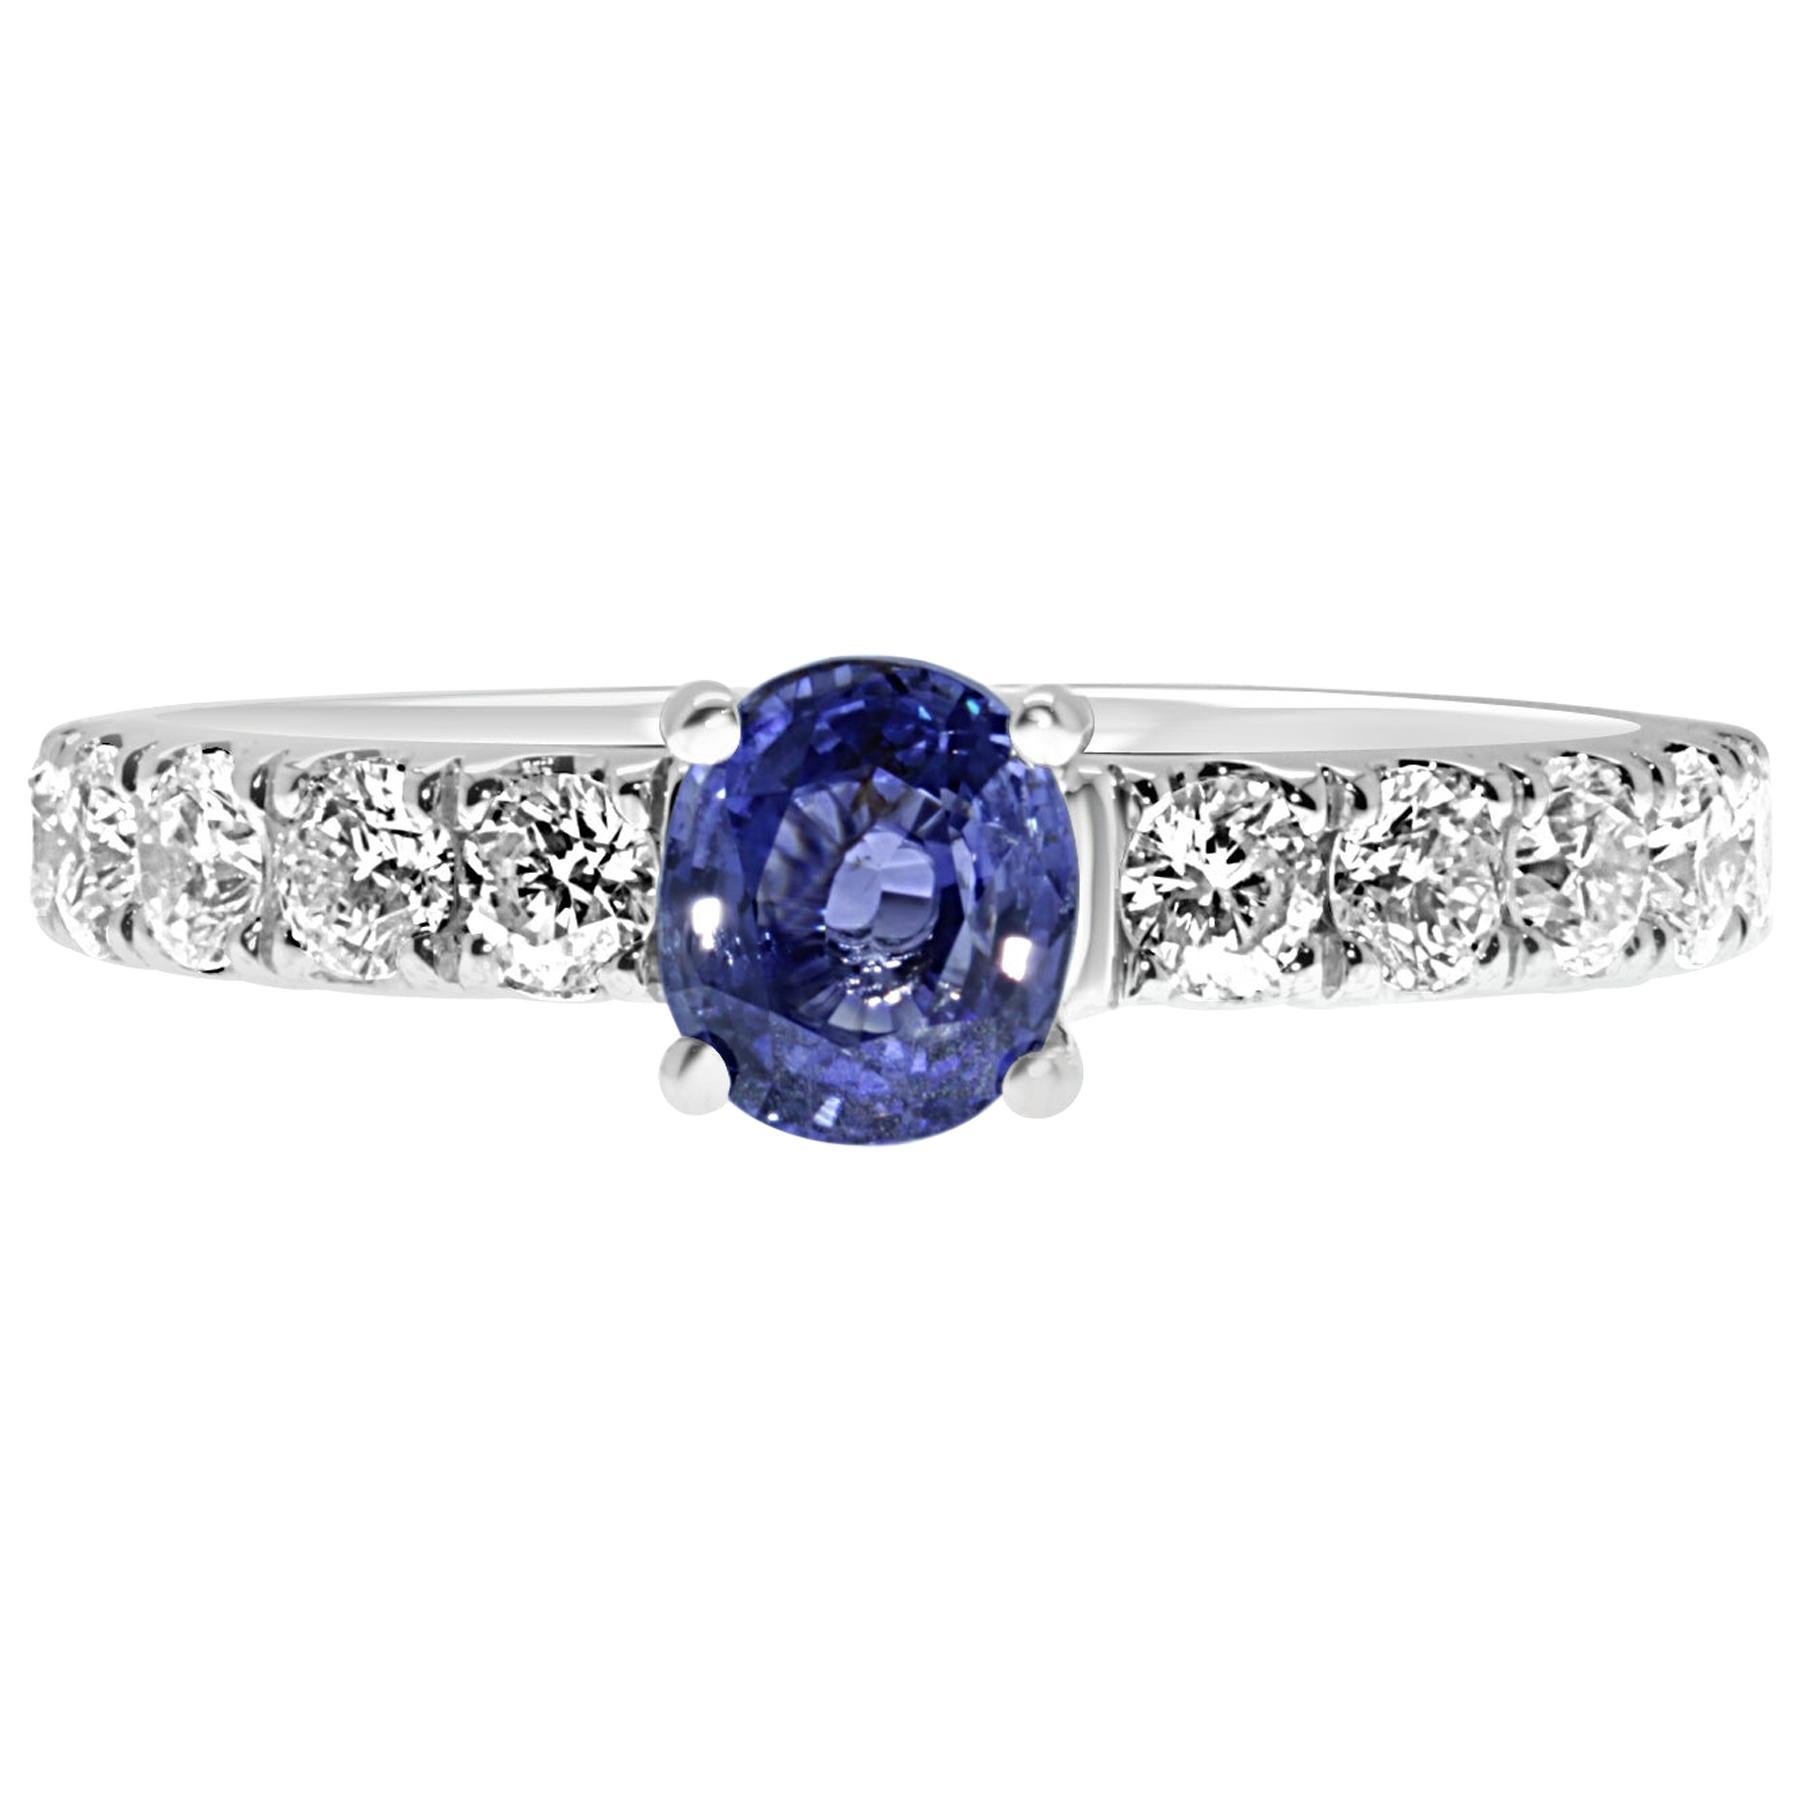 18 Karat White Gold Oval Cut Ceylon Blue Sapphire and Diamonds Engagement Ring For Sale